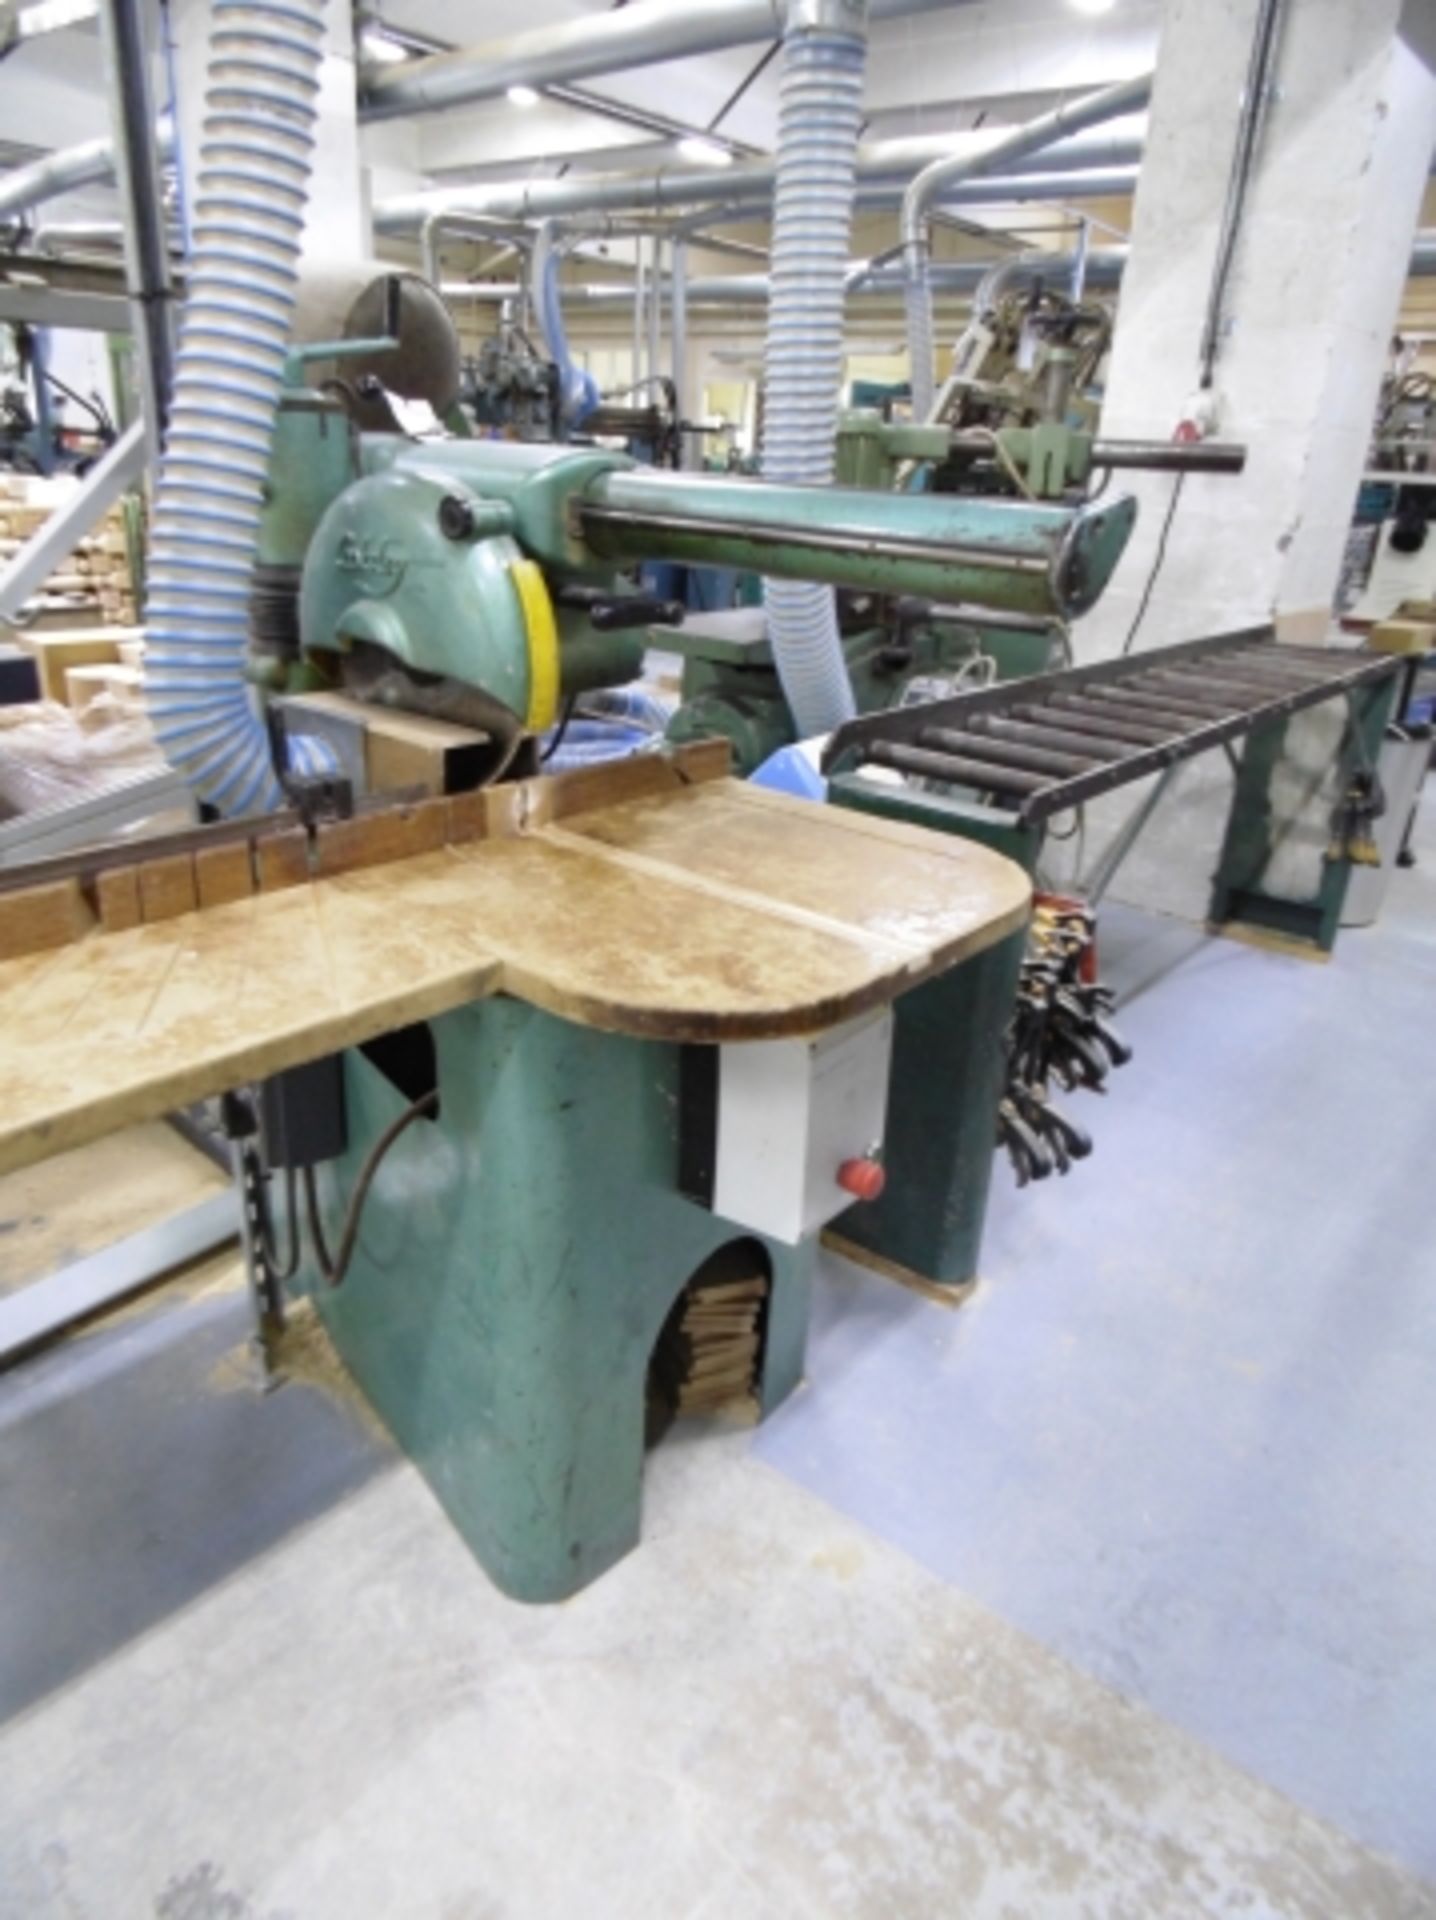 * Cooksley Cross Cut Saw; 3 Phase; fitted with SX9033 Starter Brake Module. Please Note There is